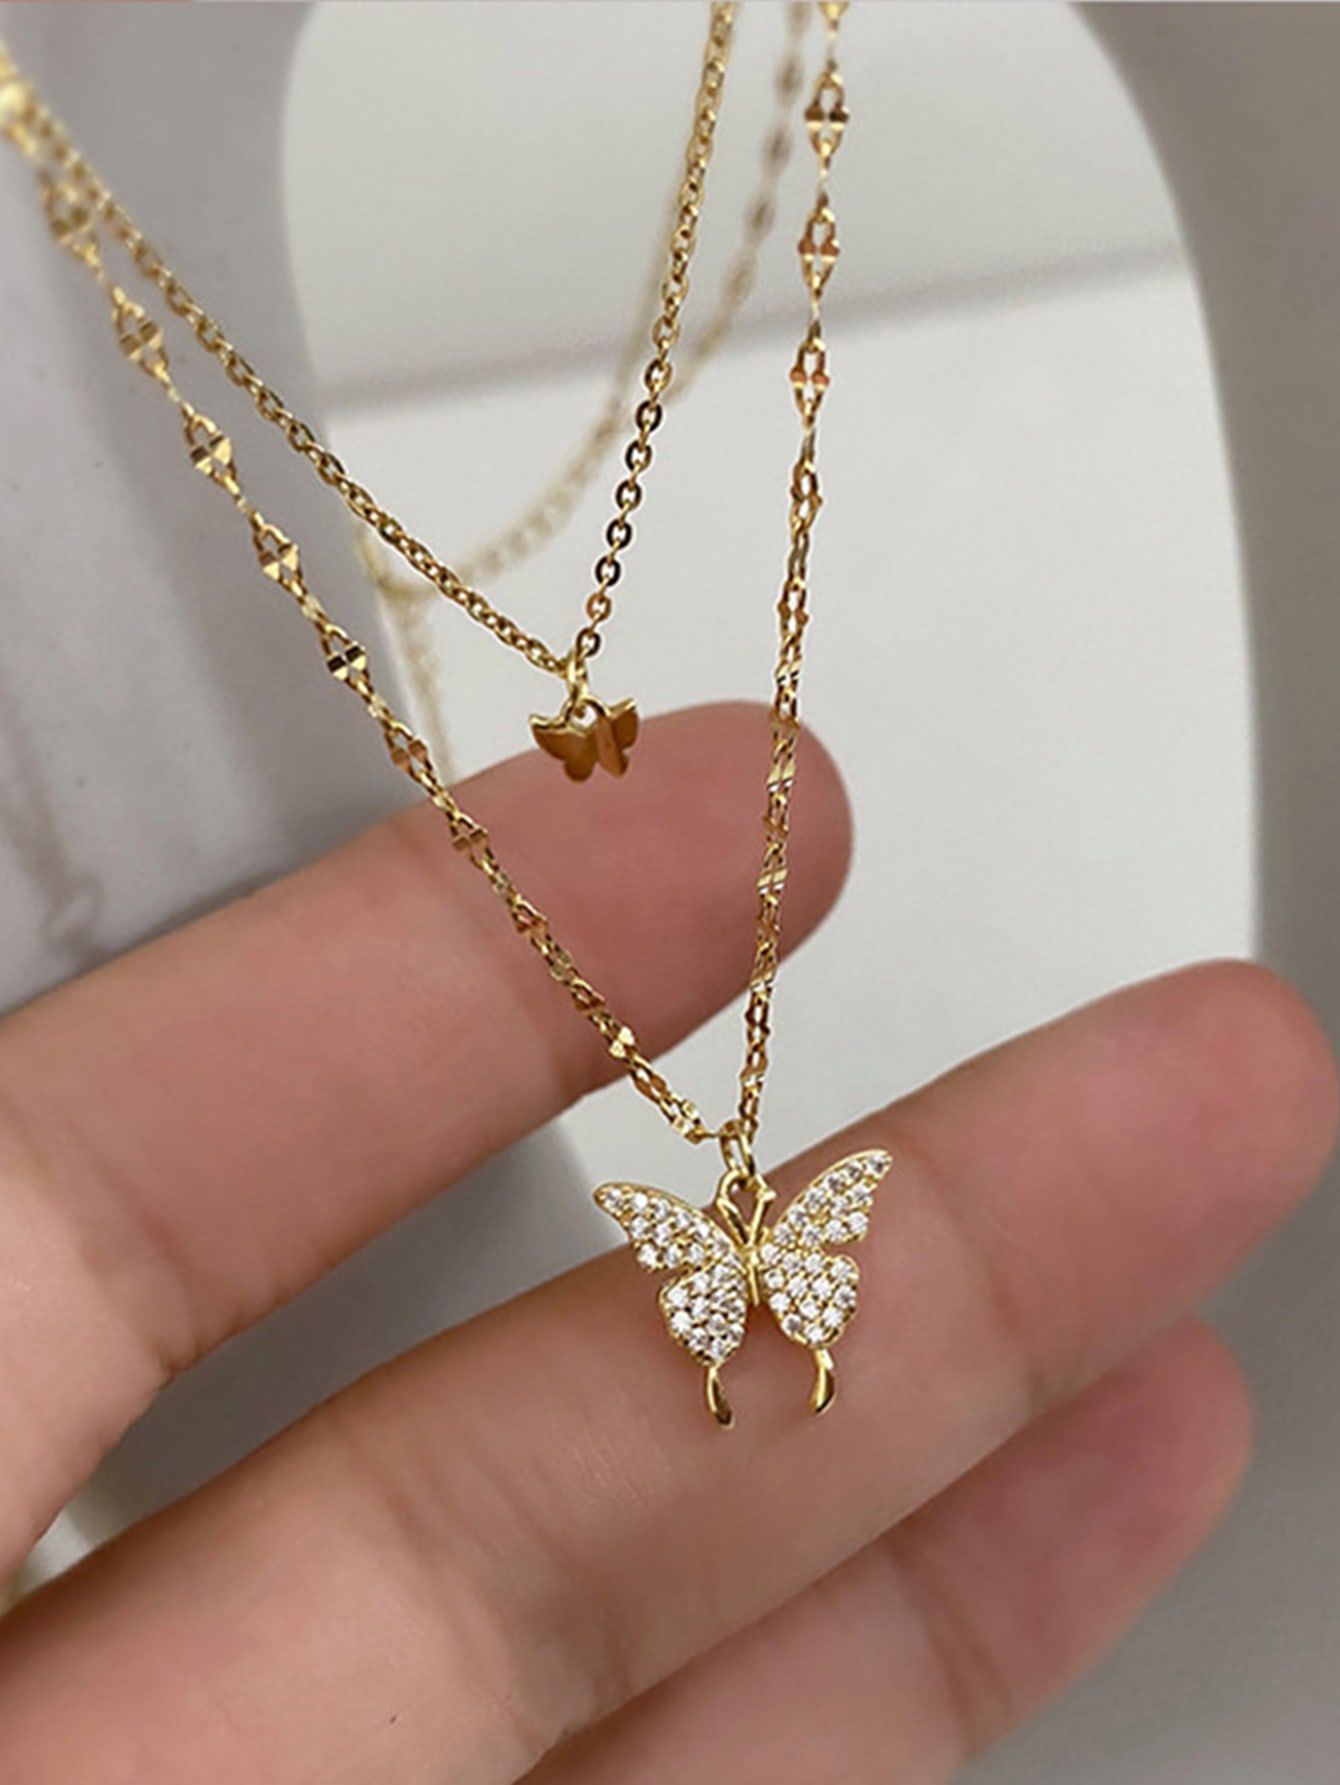 Dazzling story of a Womens necklace